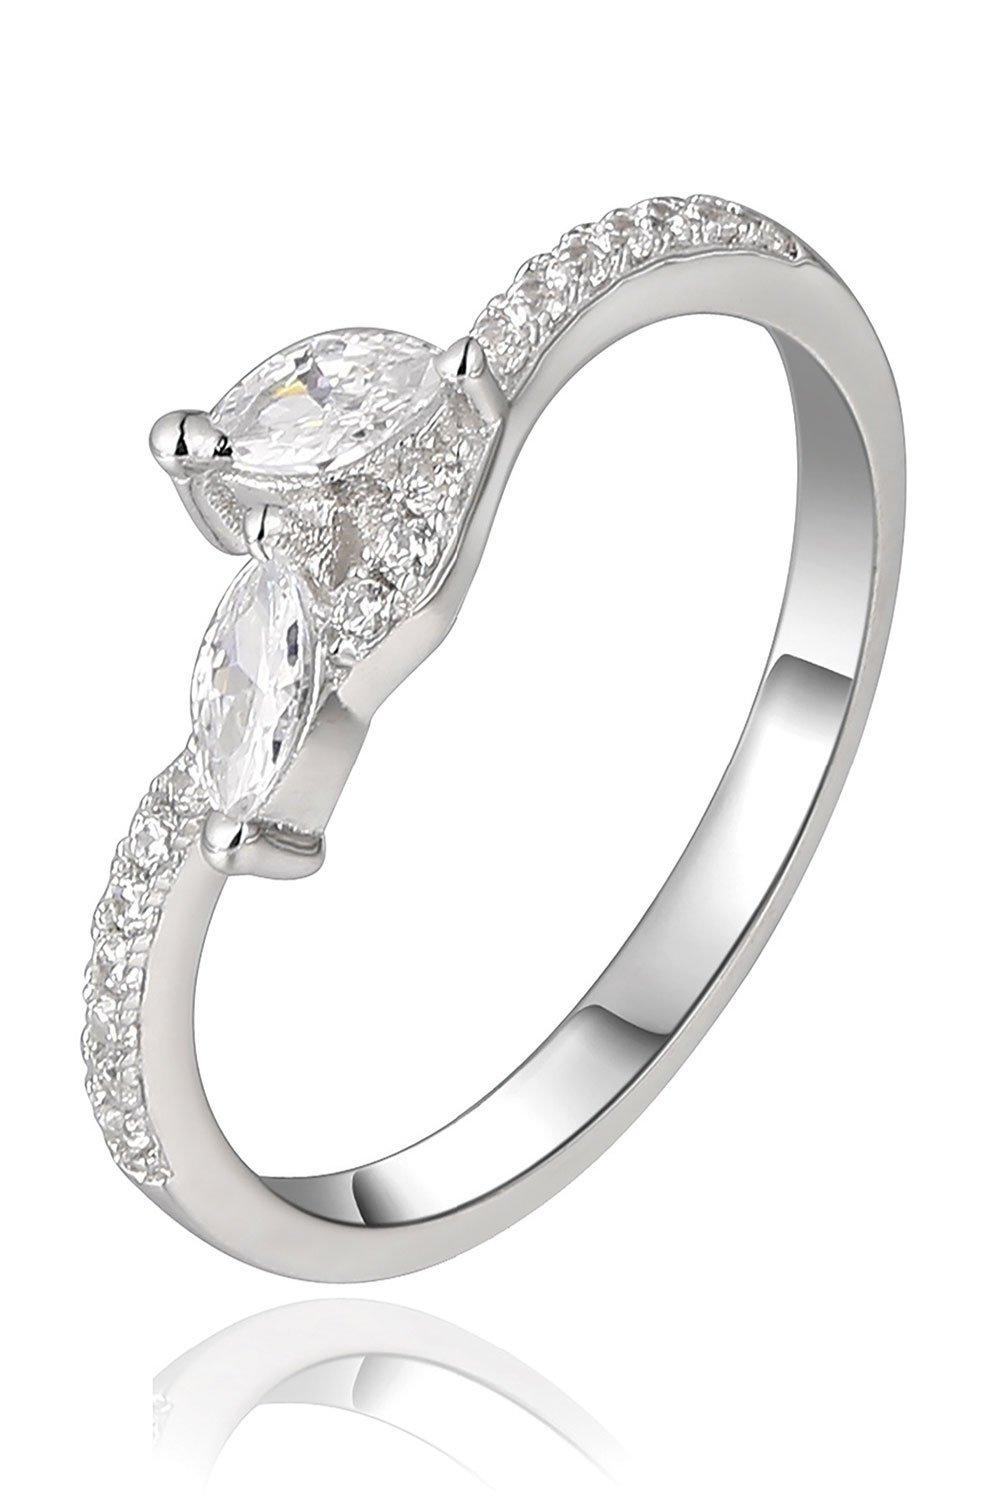 sterling silver cz dress ring - size: large